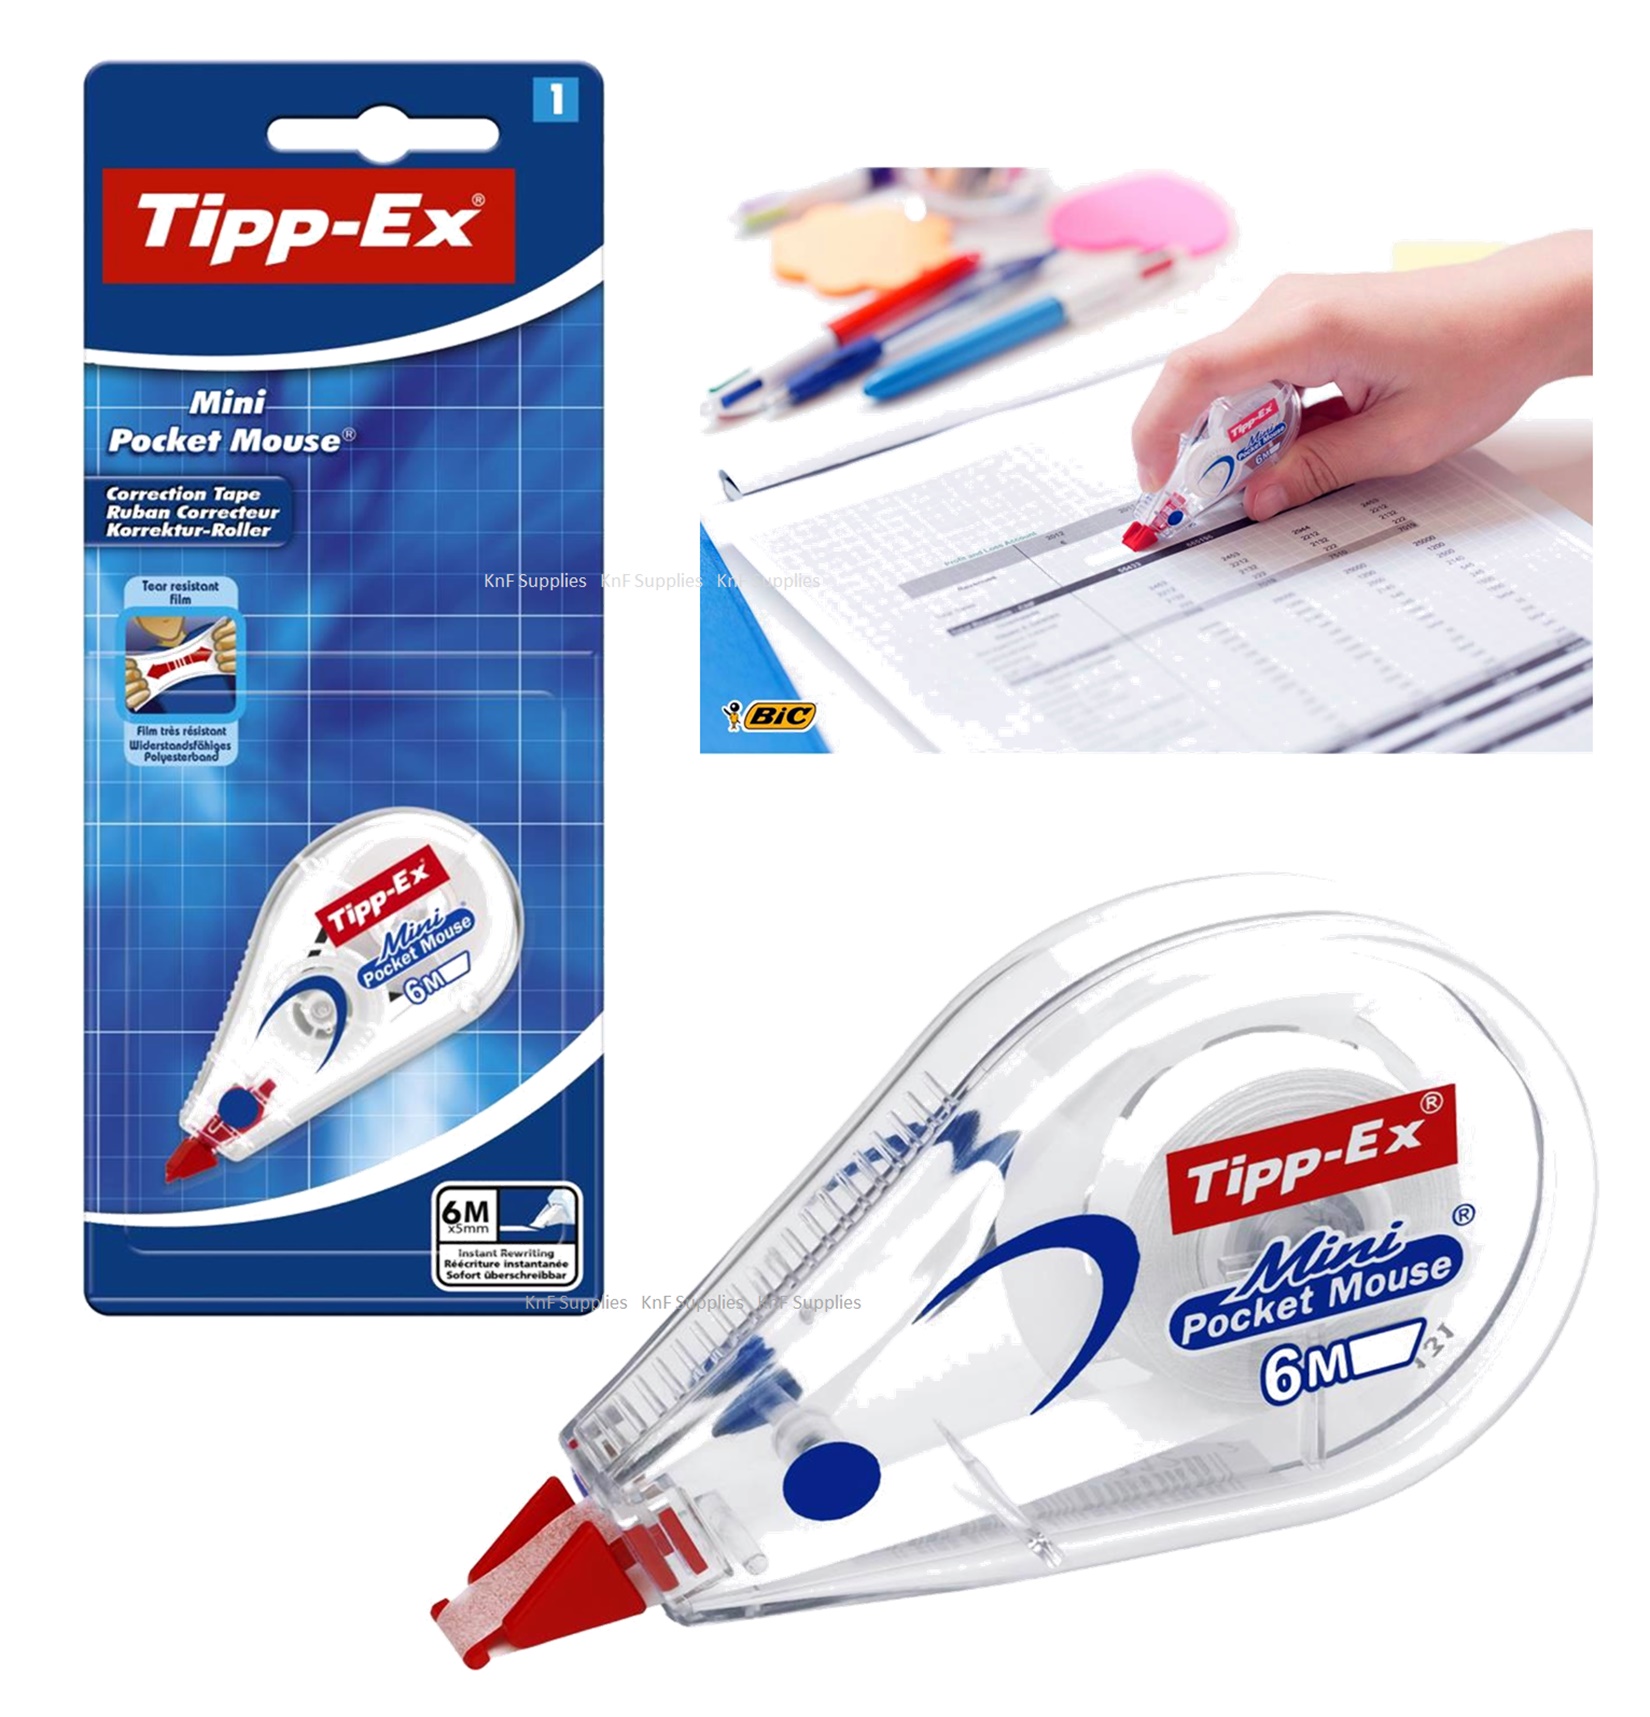 6 m Pack of 1 TIPP-Ex Mini Pocket Mouse Correction Tapes 